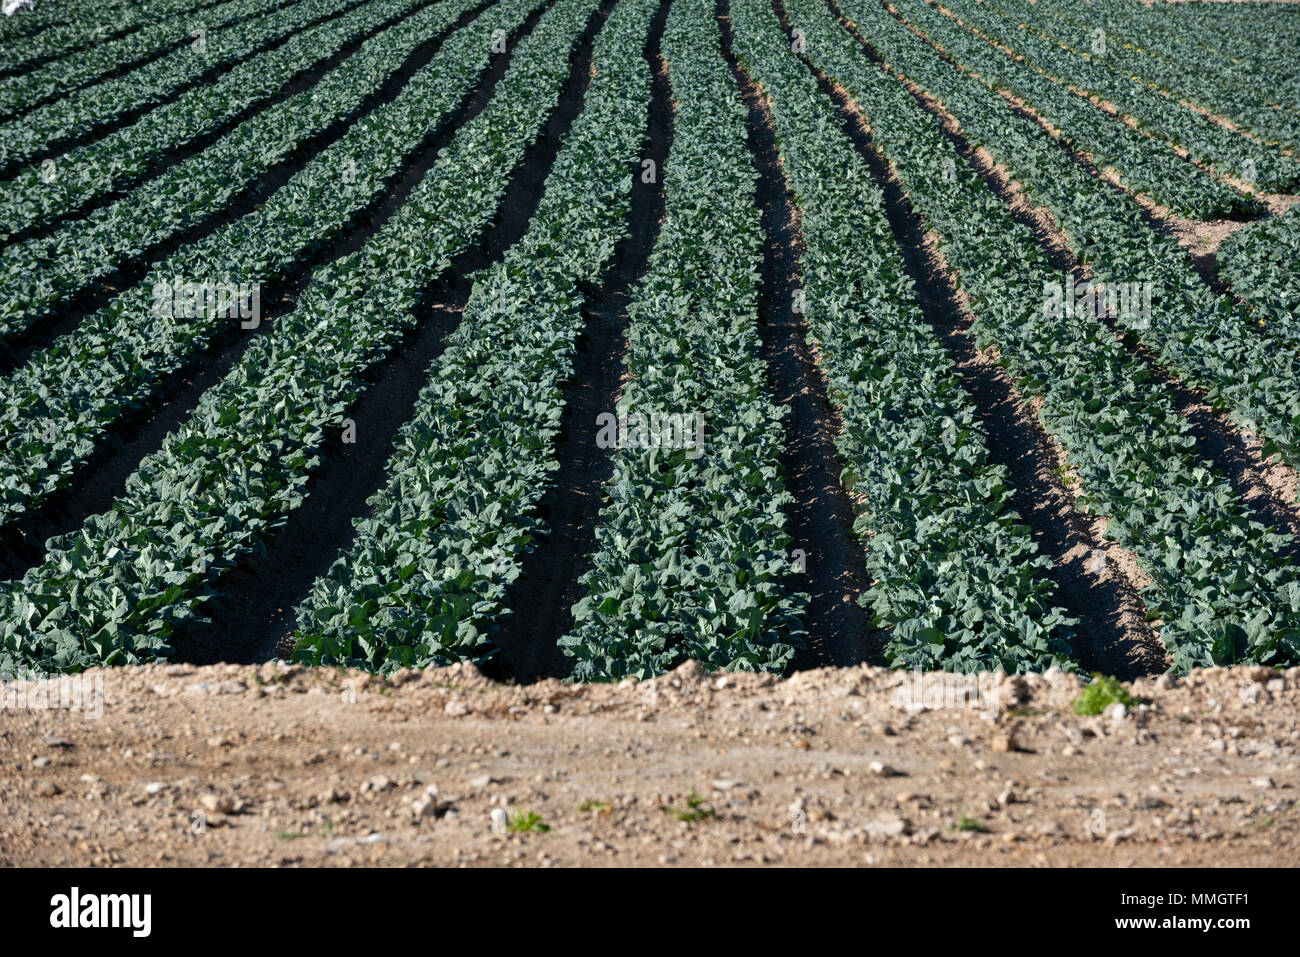 Spinach growing fields, Agricultural fields, Calasparra,Murcia,Spain Stock Photo